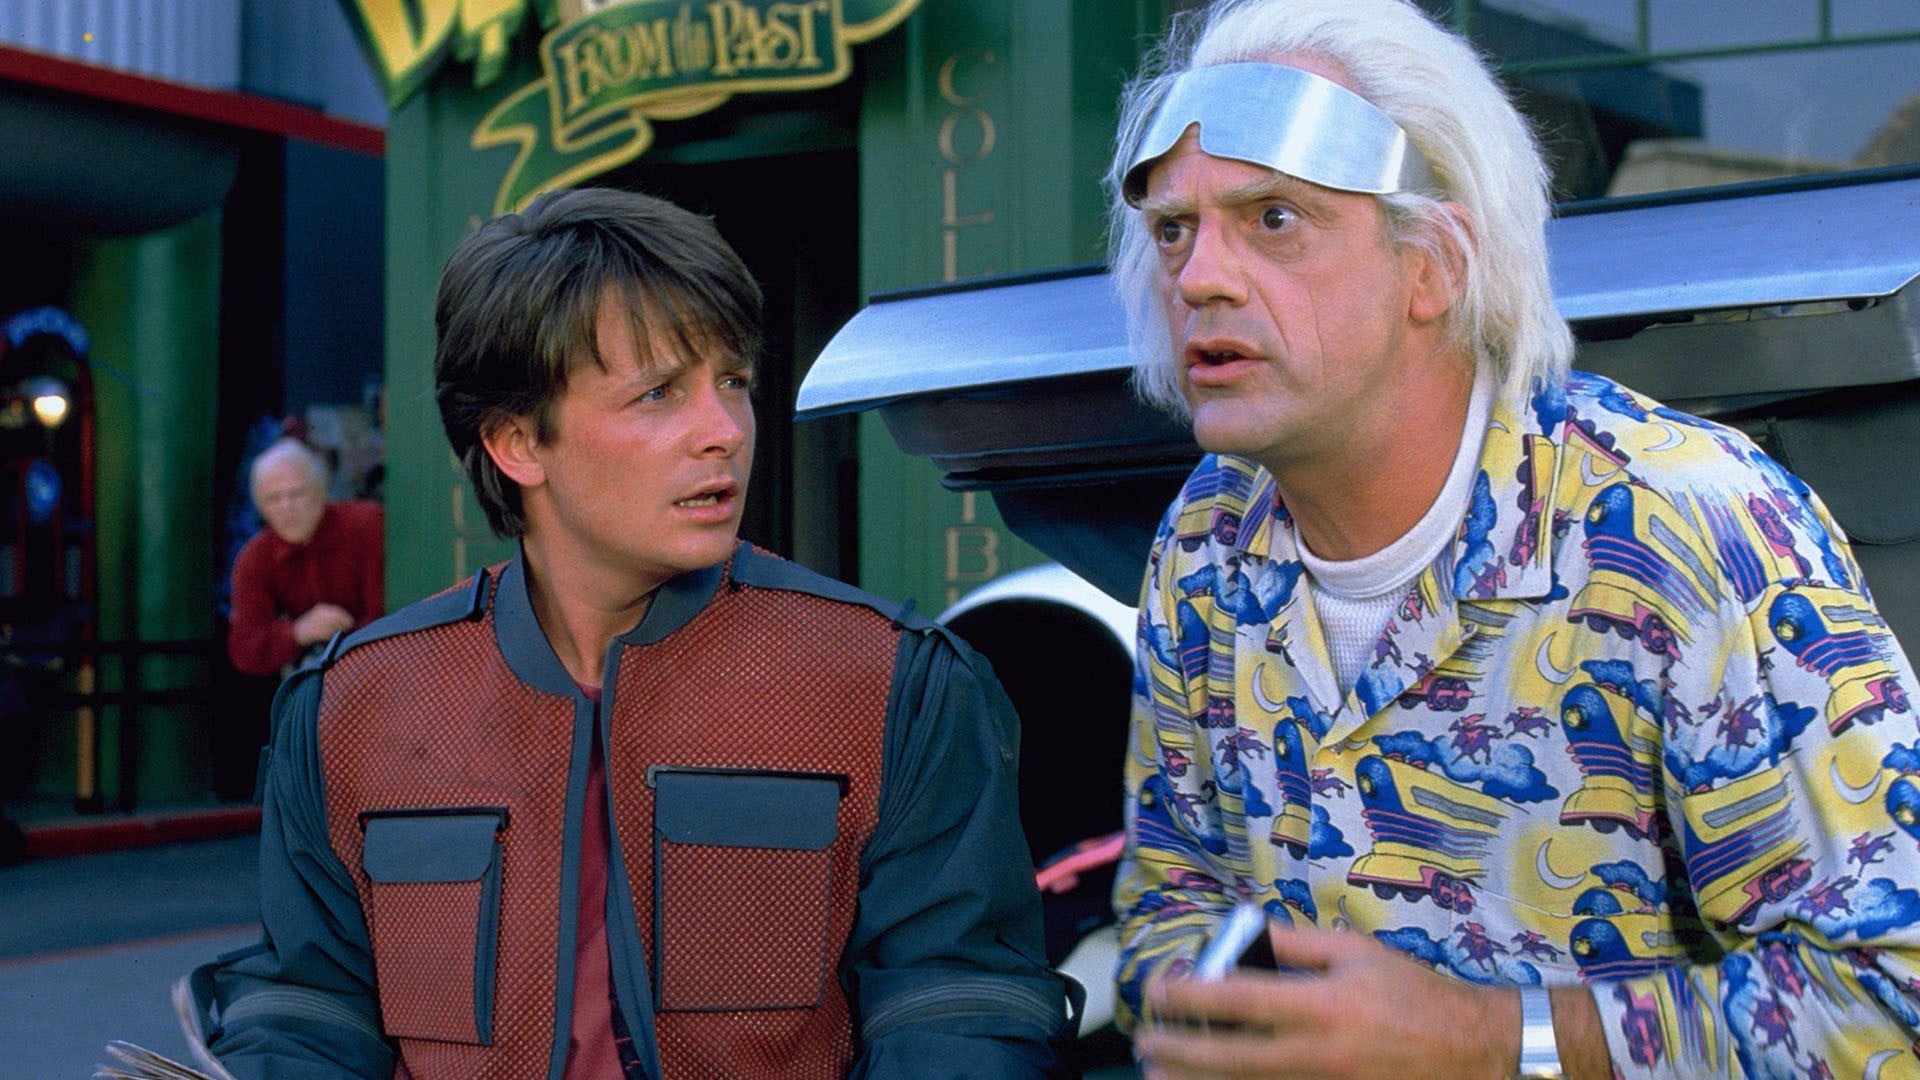 Back To The Future Part Ii